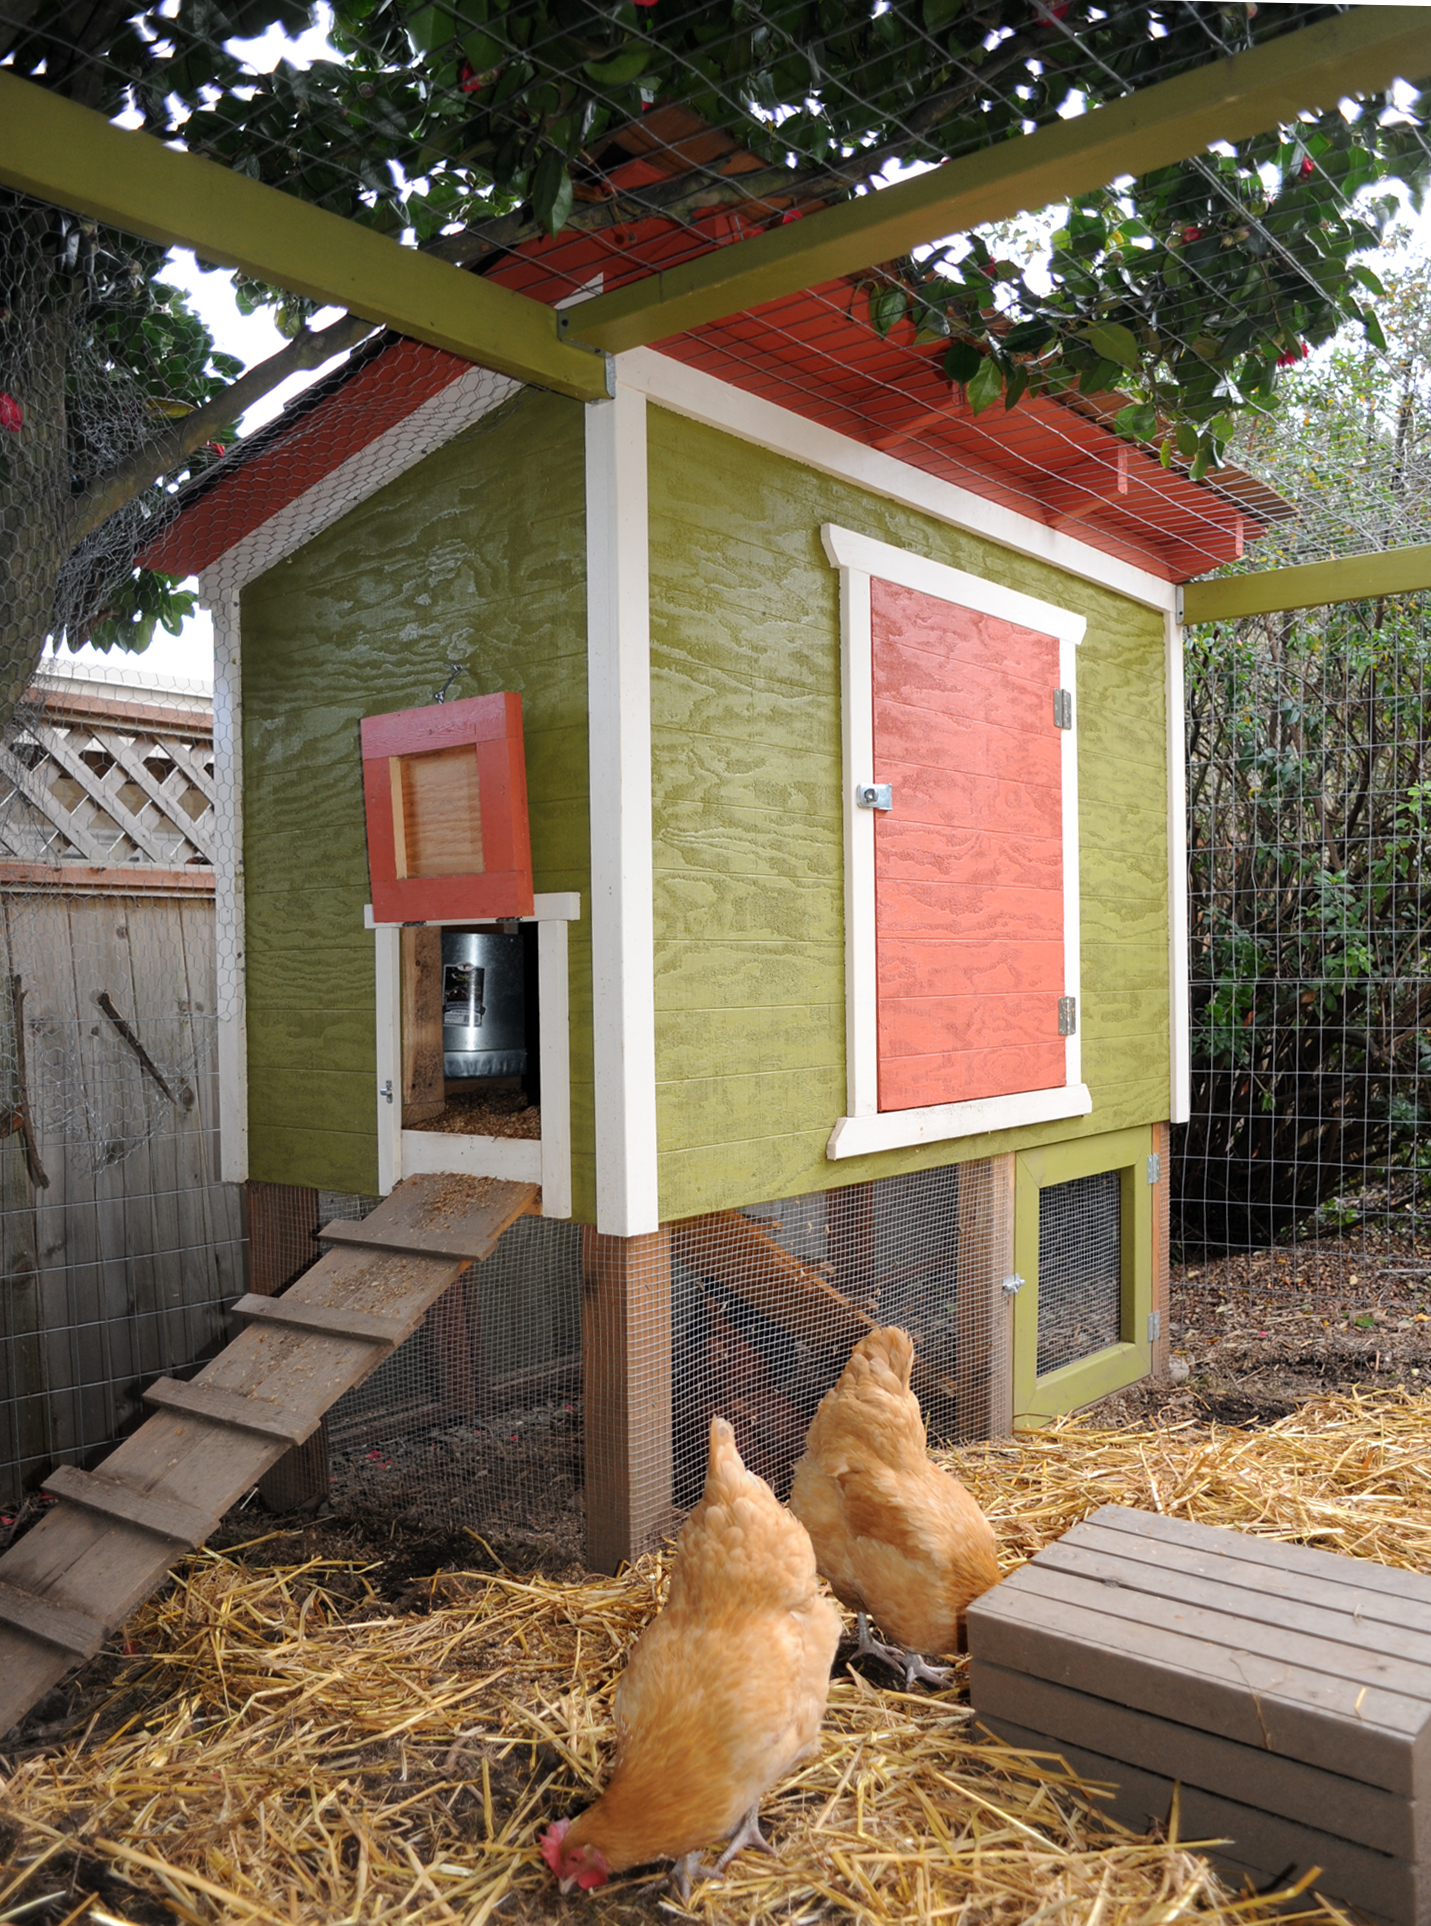 Get homemade chicken coops for sale